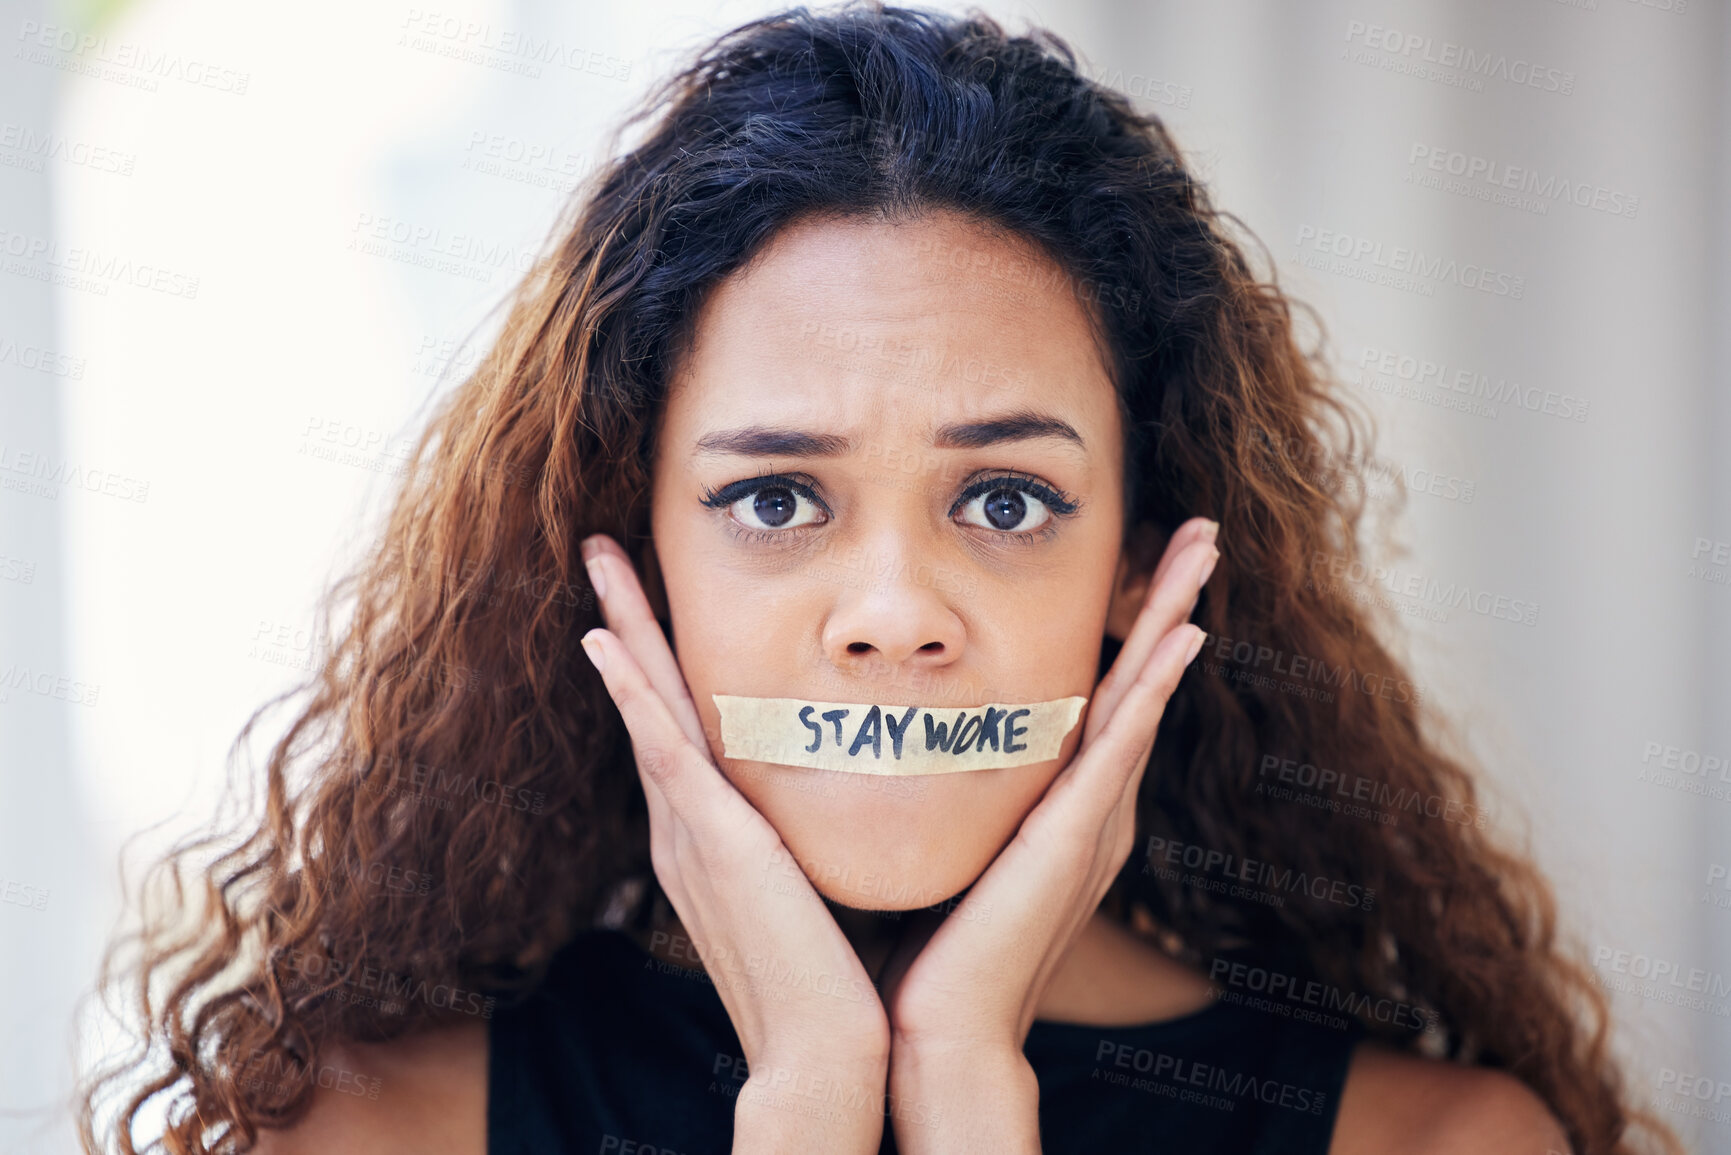 Buy stock photo Portrait of a young woman with tape on her mouth that has the words 